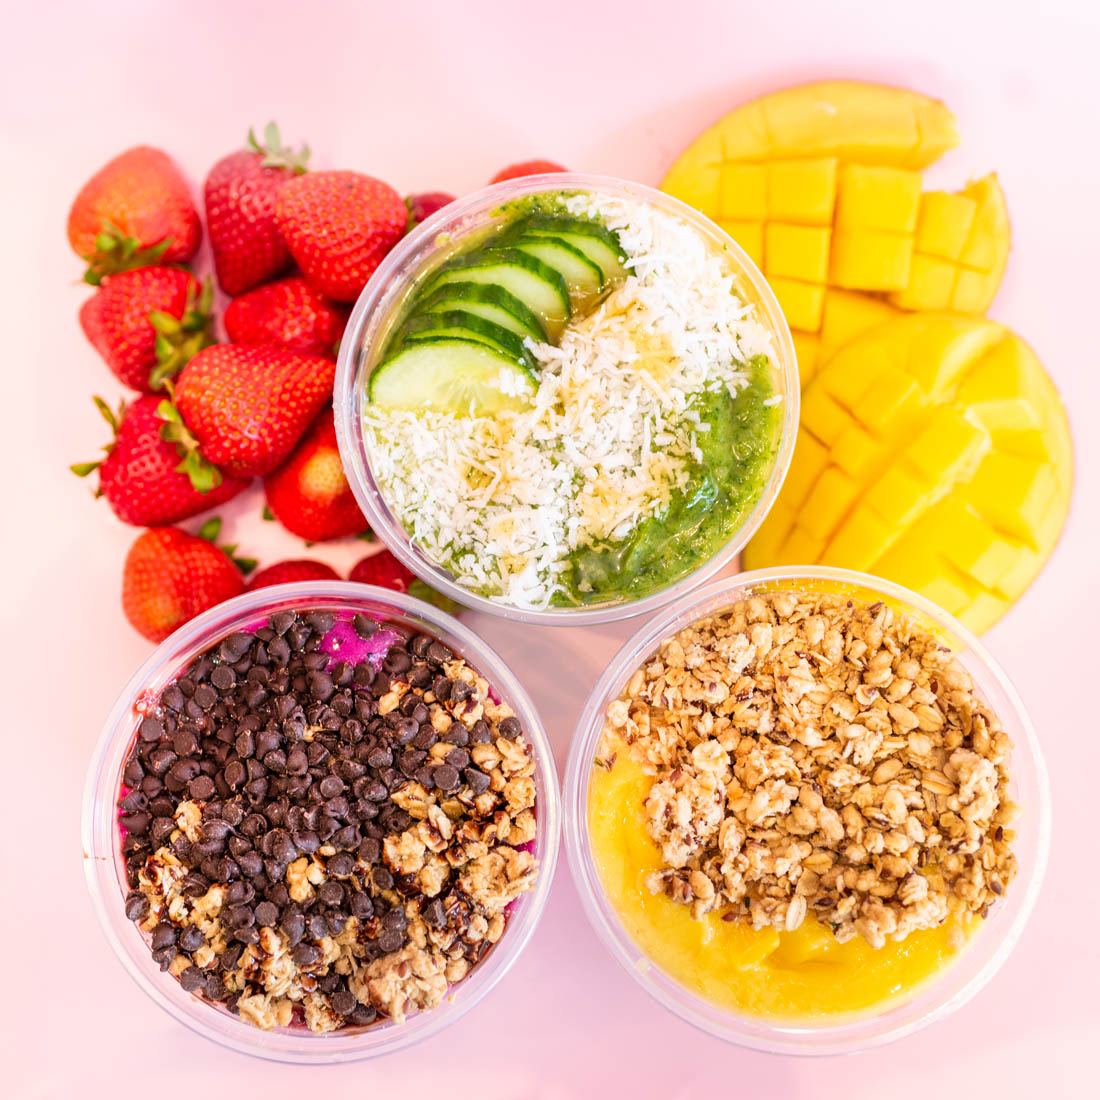 Rush Bowls smoothie bowls nutrition info in Berkeley.